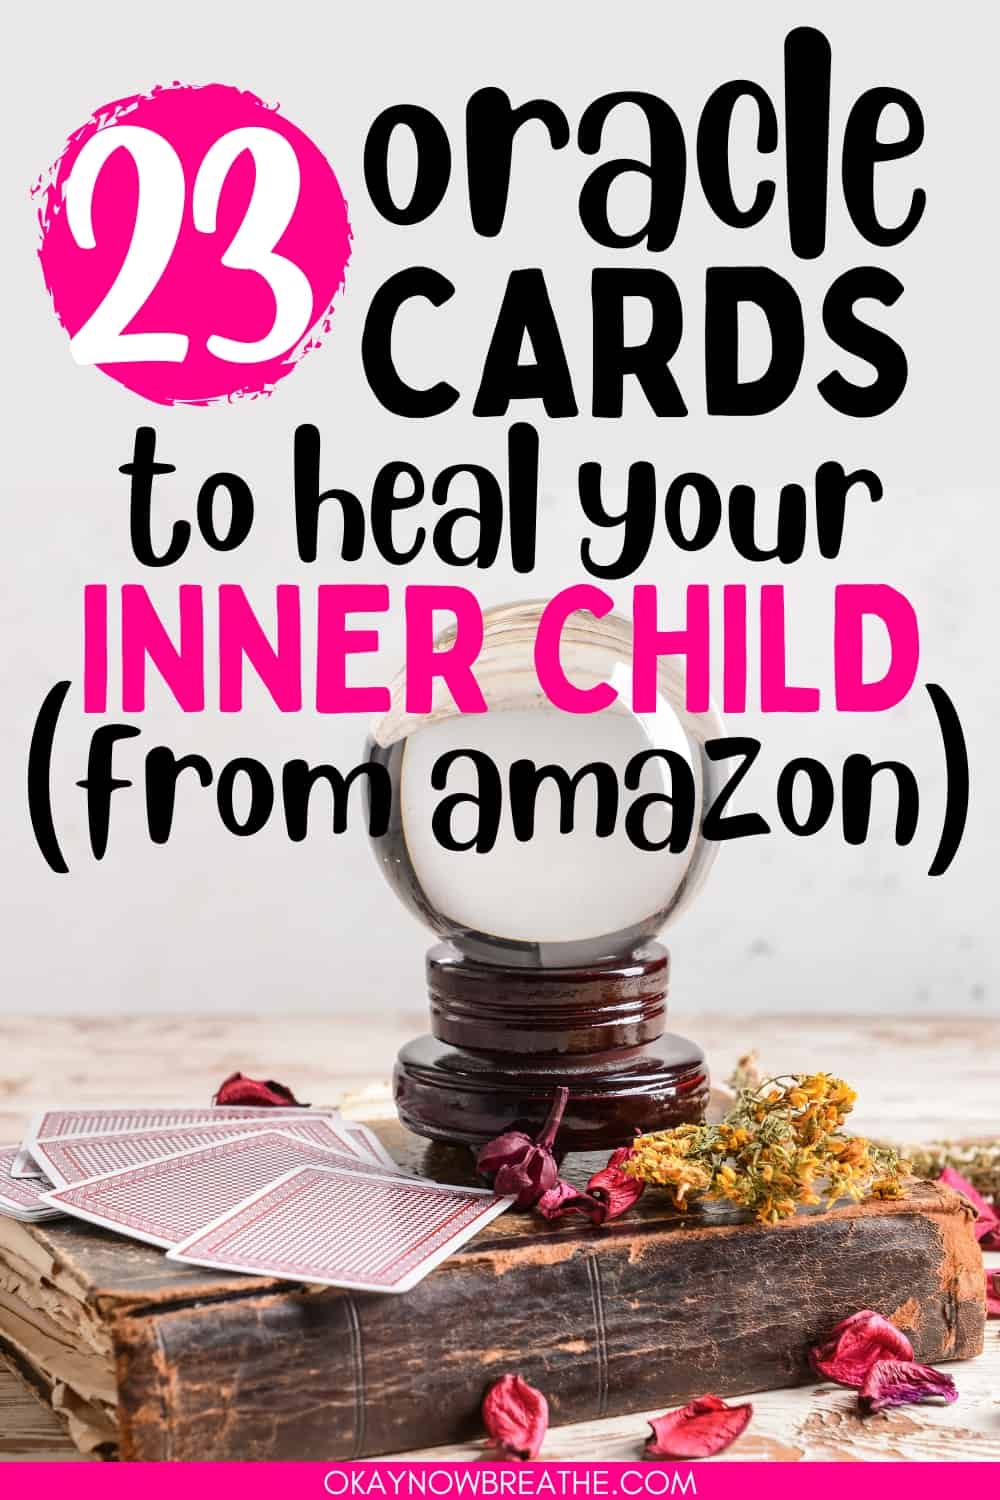 There is a distressed book with dried flower petals sprawled about. There are some spread out cards, as well as a crystal ball on top of it. There is a text overlay that says: 23 oracle cards to heal your inner child (from amazon)